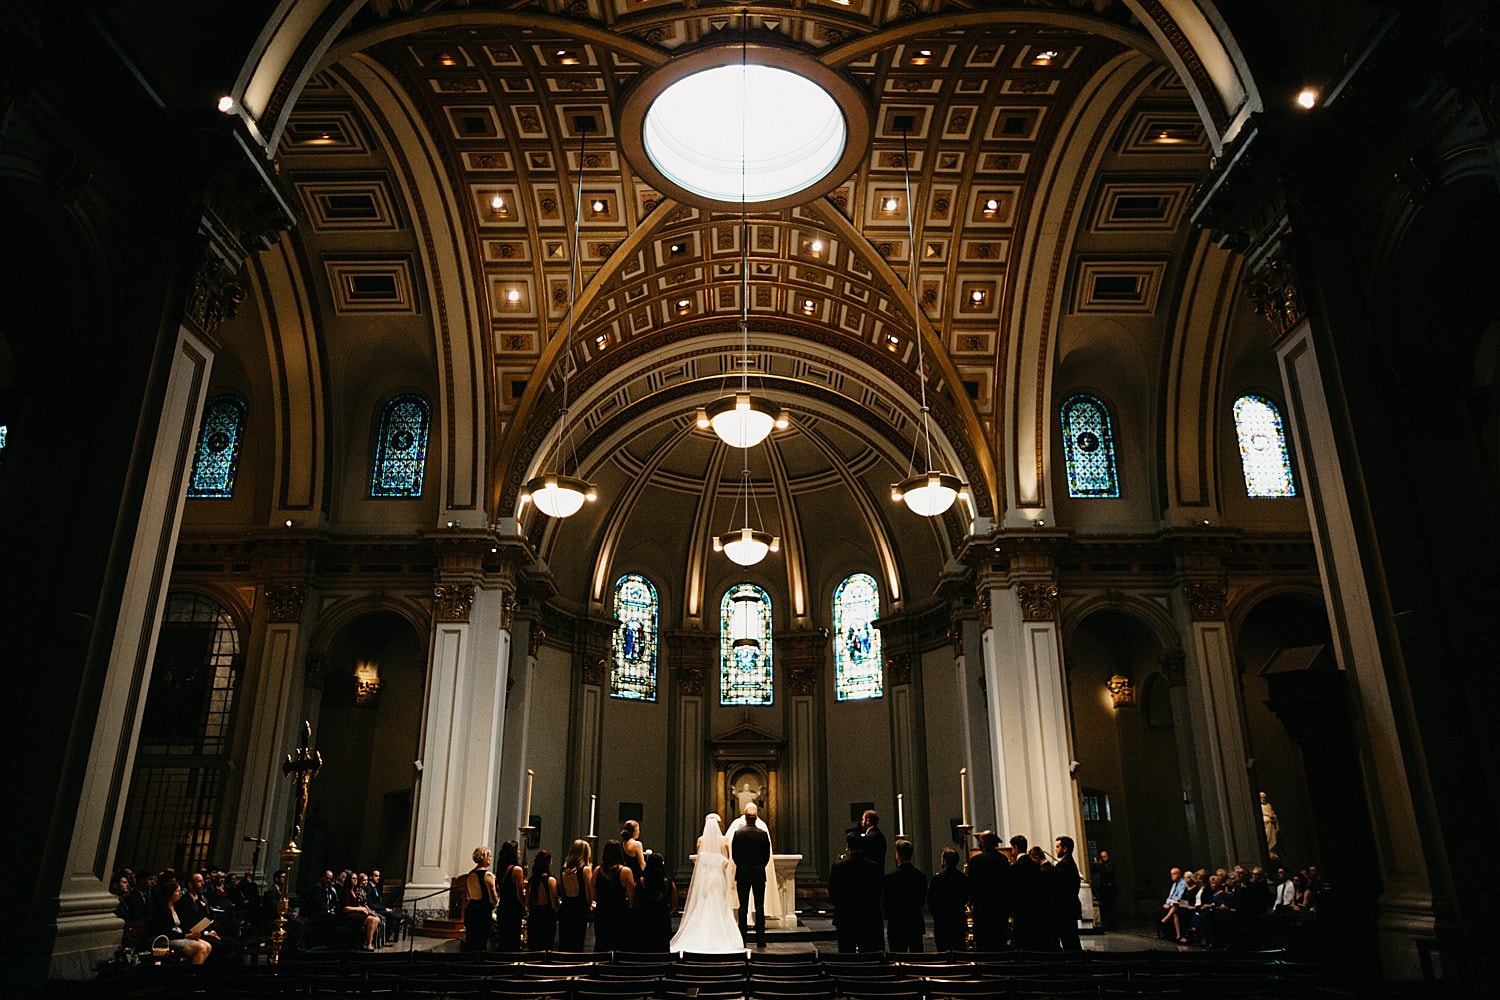 stunning shot of the bride and groom on the altar at st james cathedral during their catholic wedding ceremony 415 Westlake Wedding by Marcela Pulido Seattle Wedding Photographer